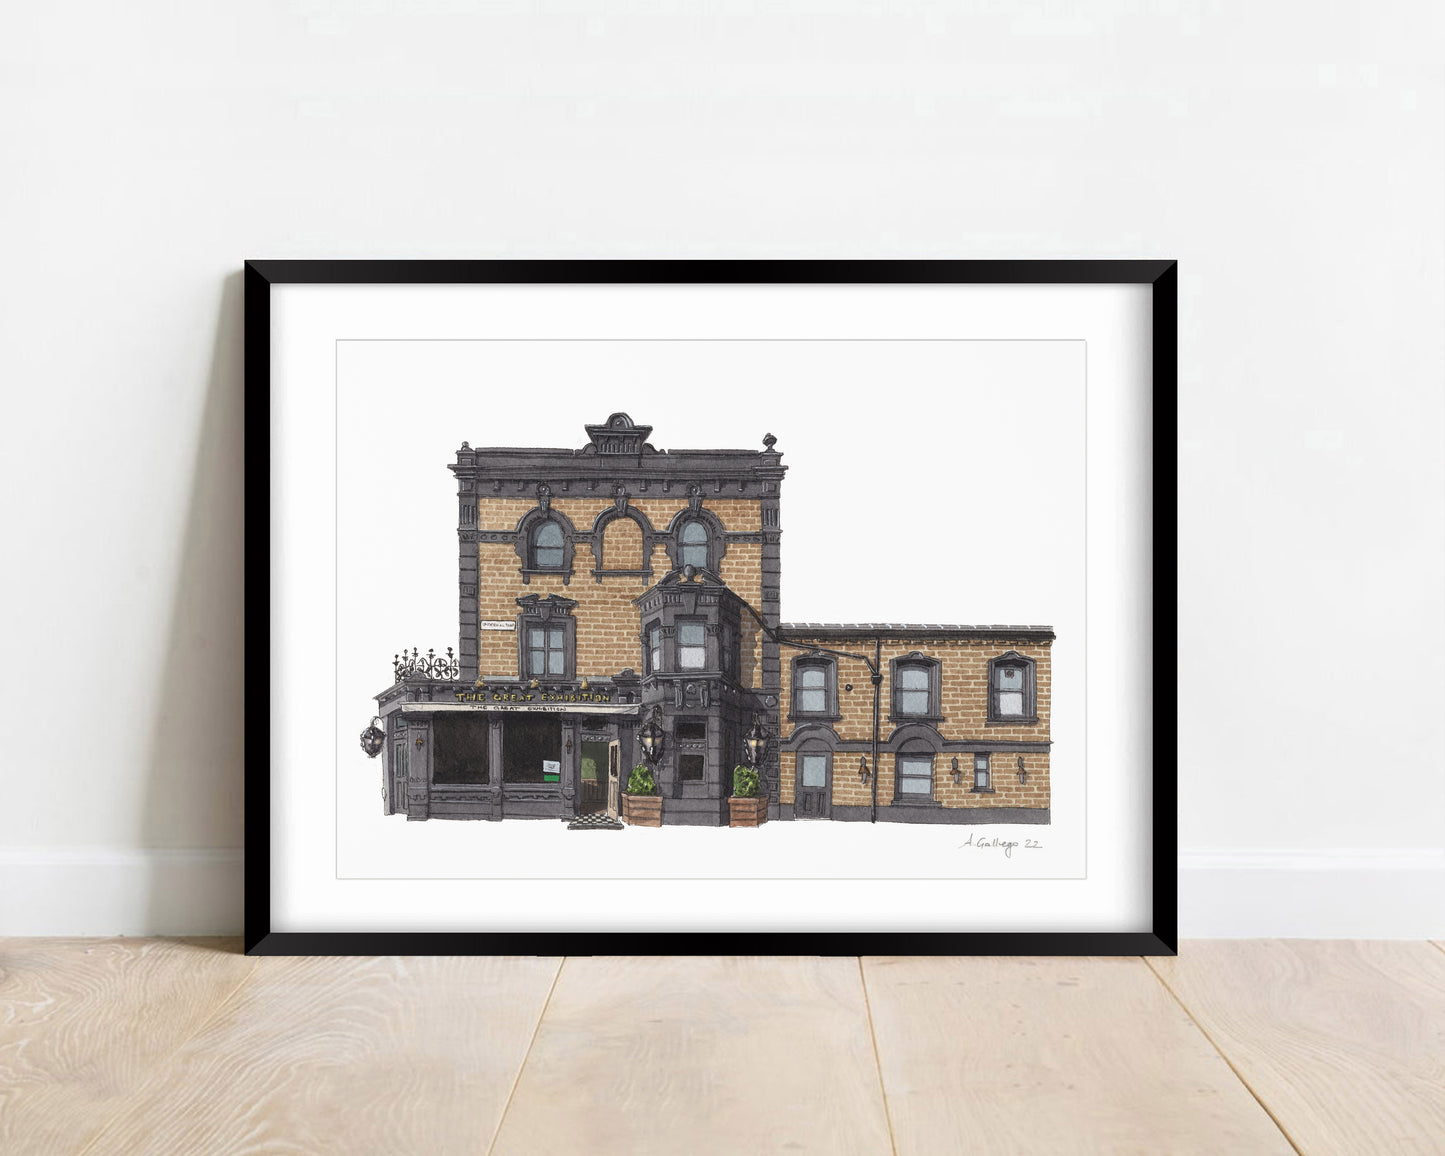 East Dulwich - The Great Exhibition Pub - Giclée Print (unframed)